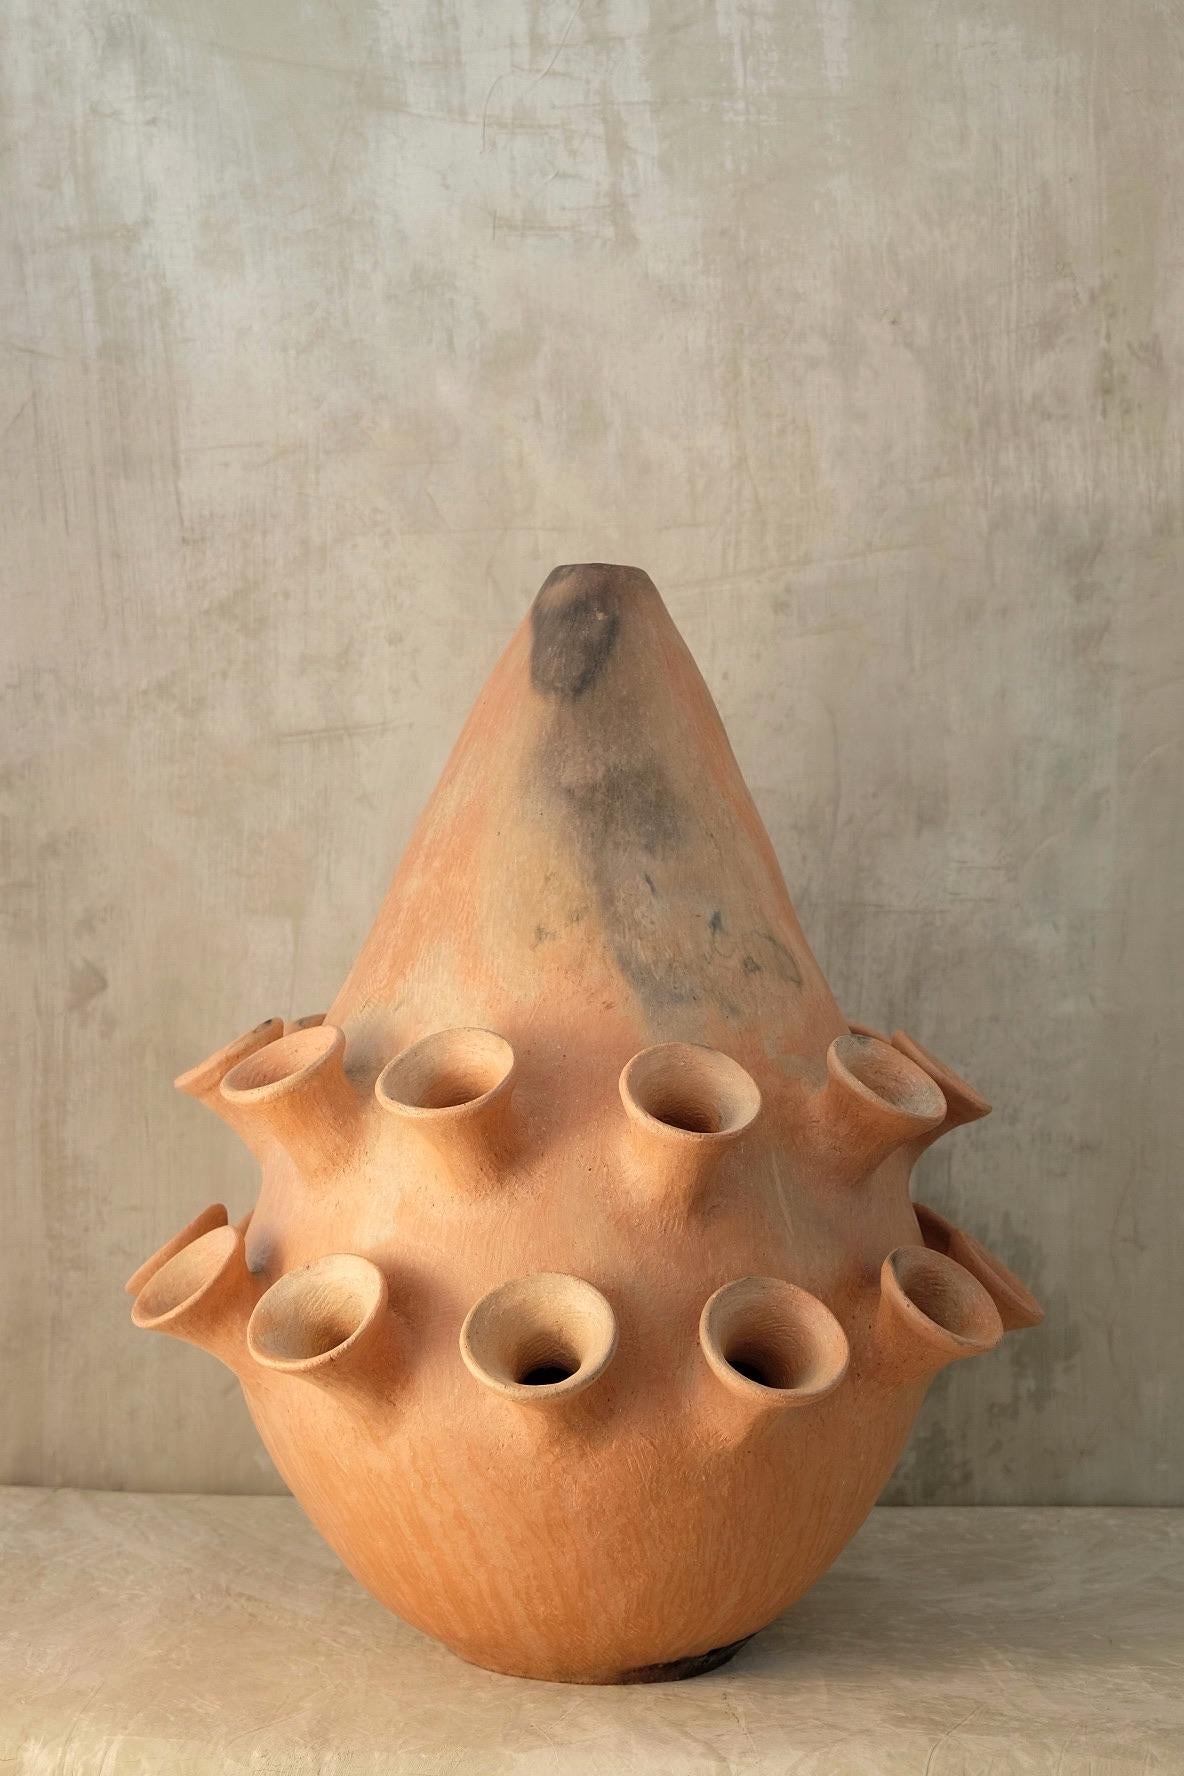 Set of Tama vases by Onora
Dimensions: 
D 45 x H 68 cm
D 60 x H 80 cm
Materials: Clay

Inspired in the traditional large format vessels used to store water, grains or prepare food, our playful reinterpretation of Mixe pottery plays homage to